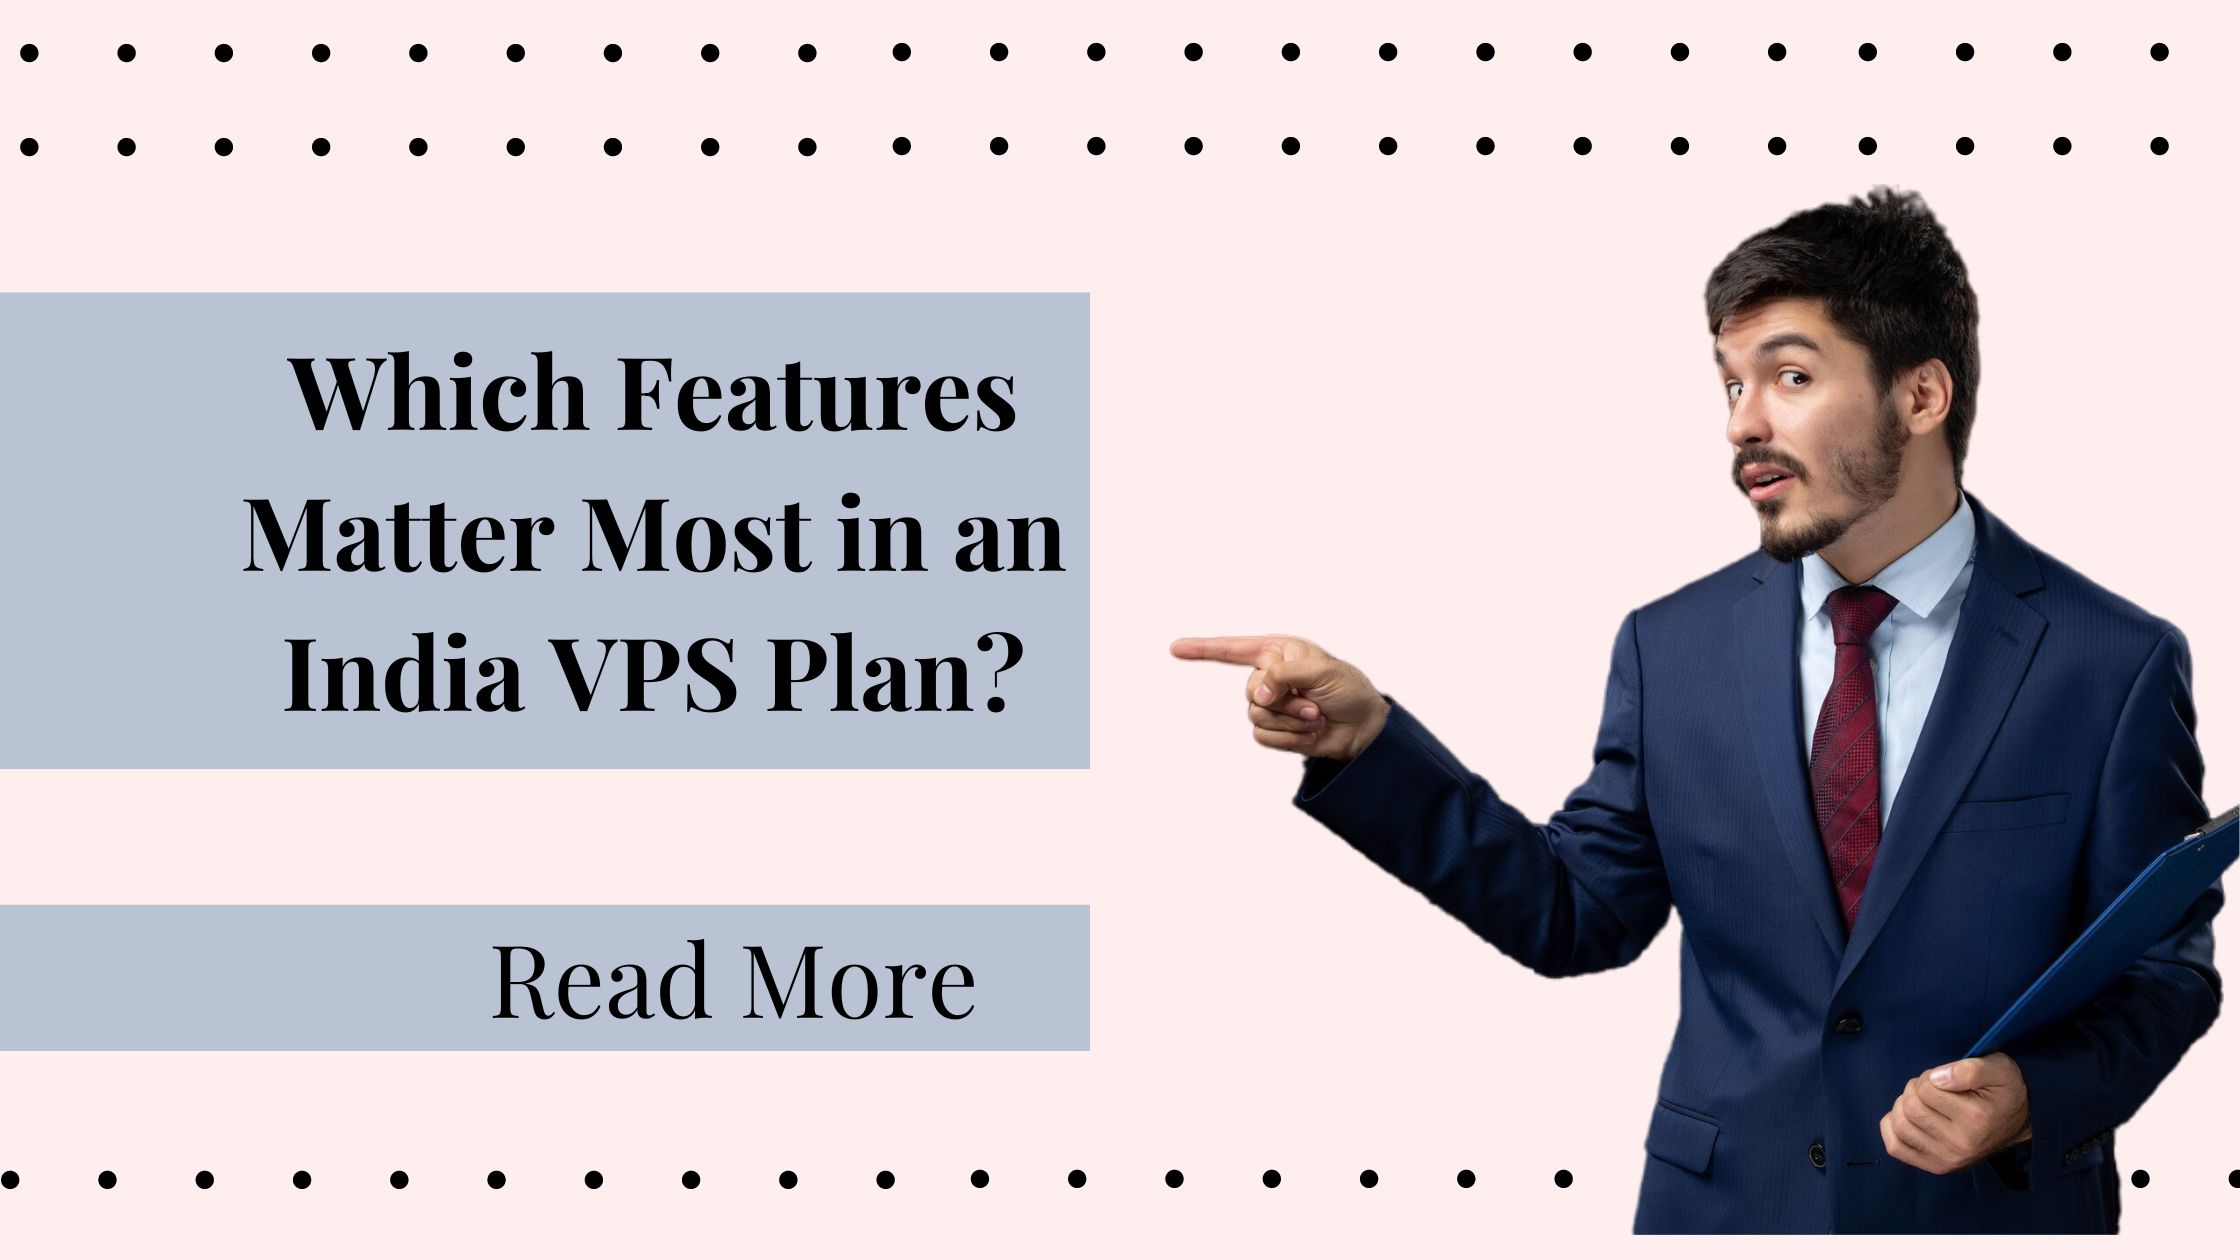 Discover the key features to consider in an India VPS plan. Learn about performance, security, and top providers for the best hosting.